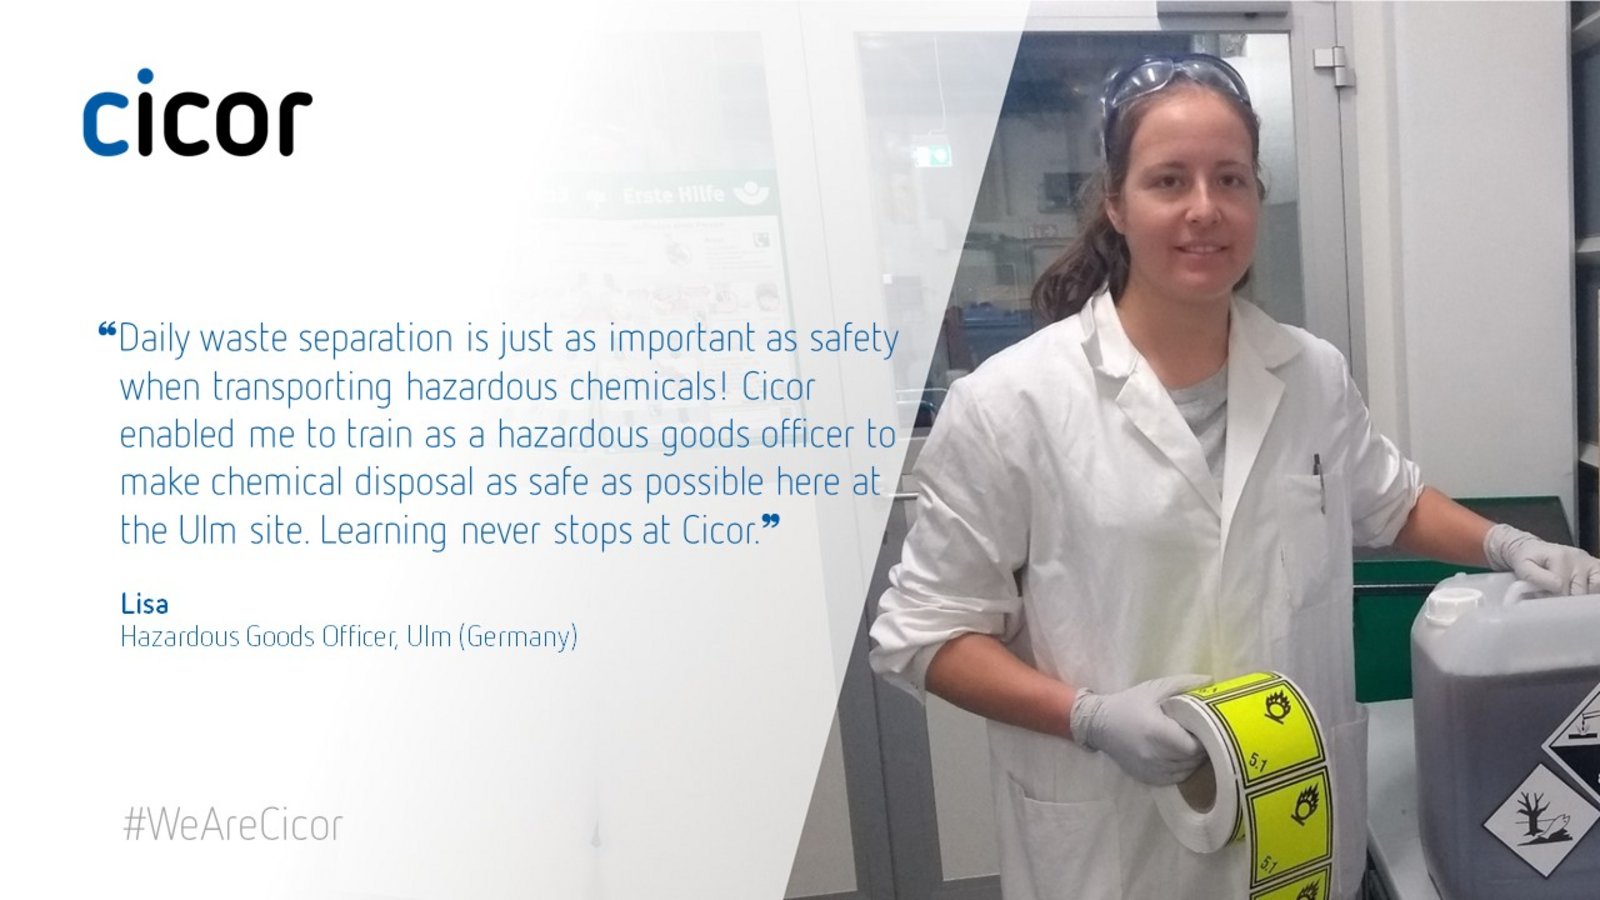 Testimonial of Lisa who works at the Cicor site in Ulm